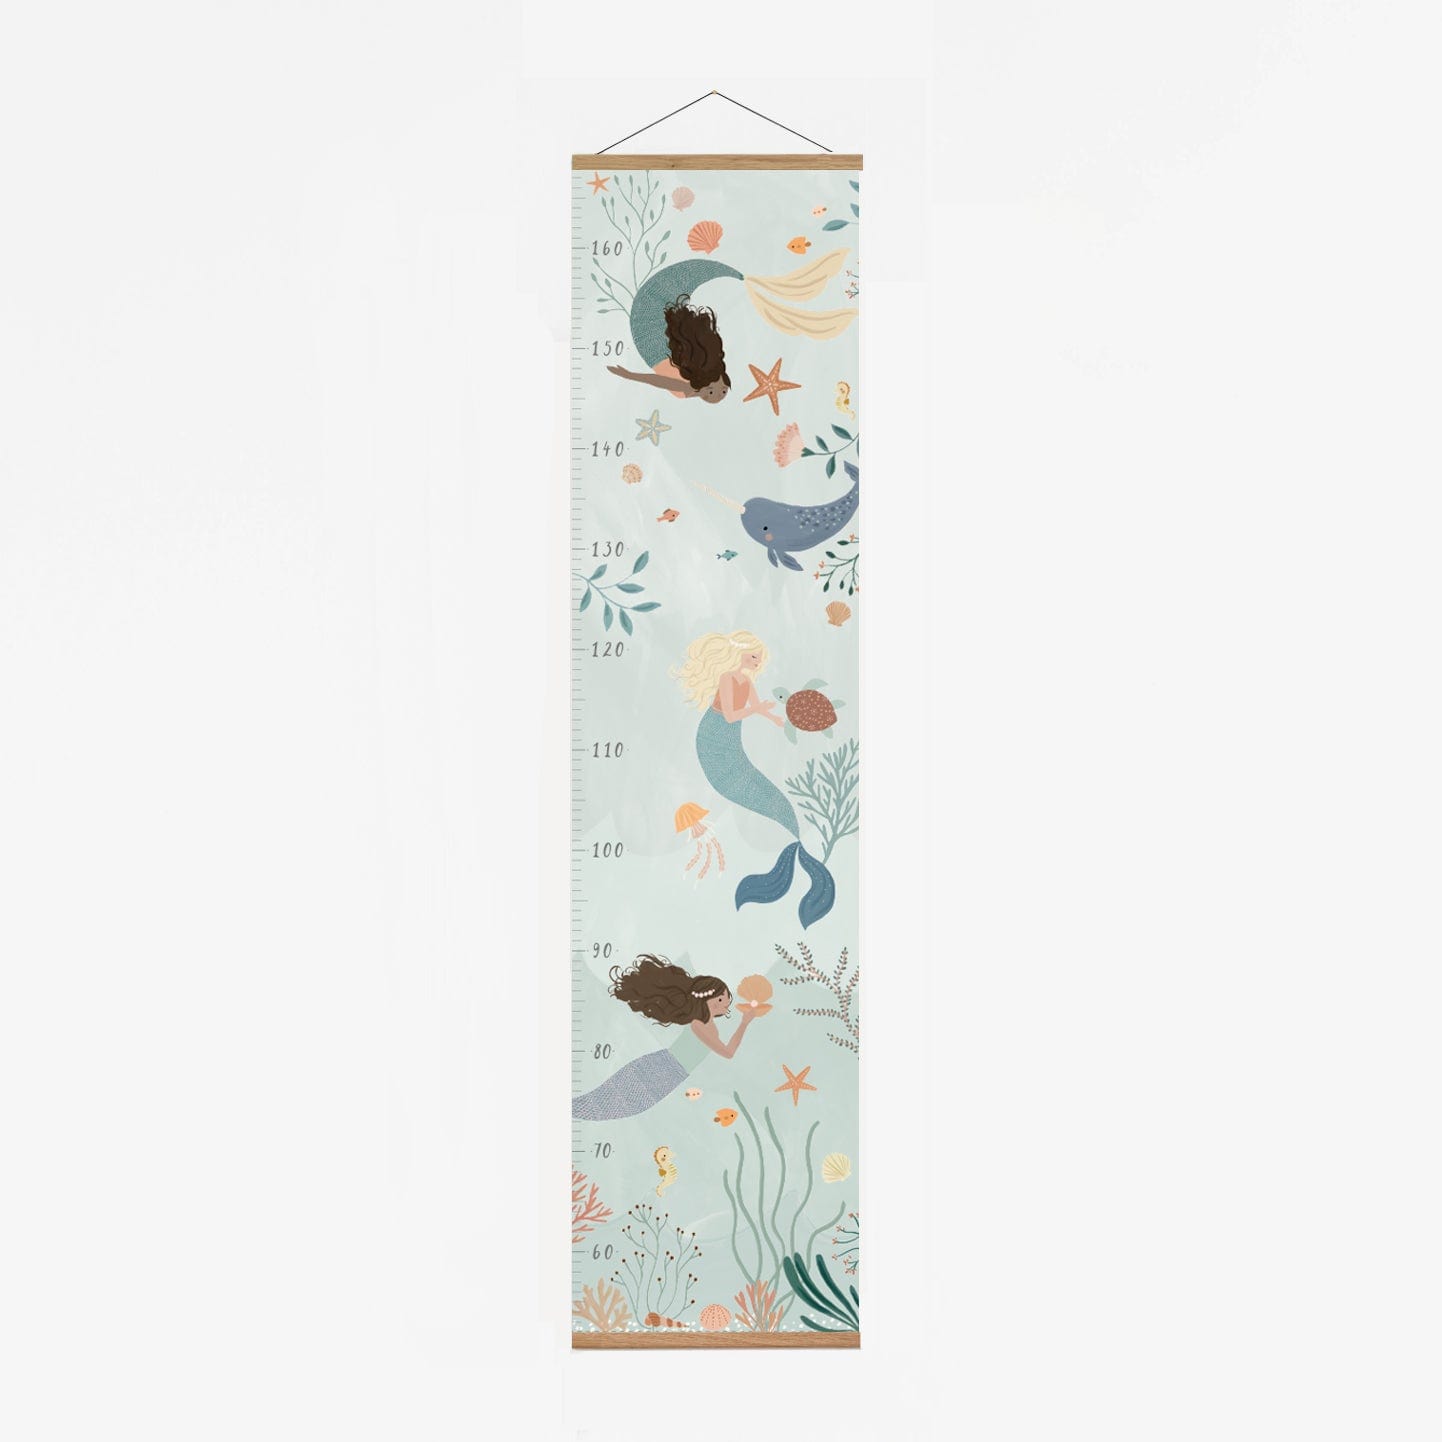 Full length photo of the mermaid height chart, showing the oak hanger at the top and bottom. Height chart features 3 mermaids, a turtle, fish, star fish, a jellyfish among foliage.